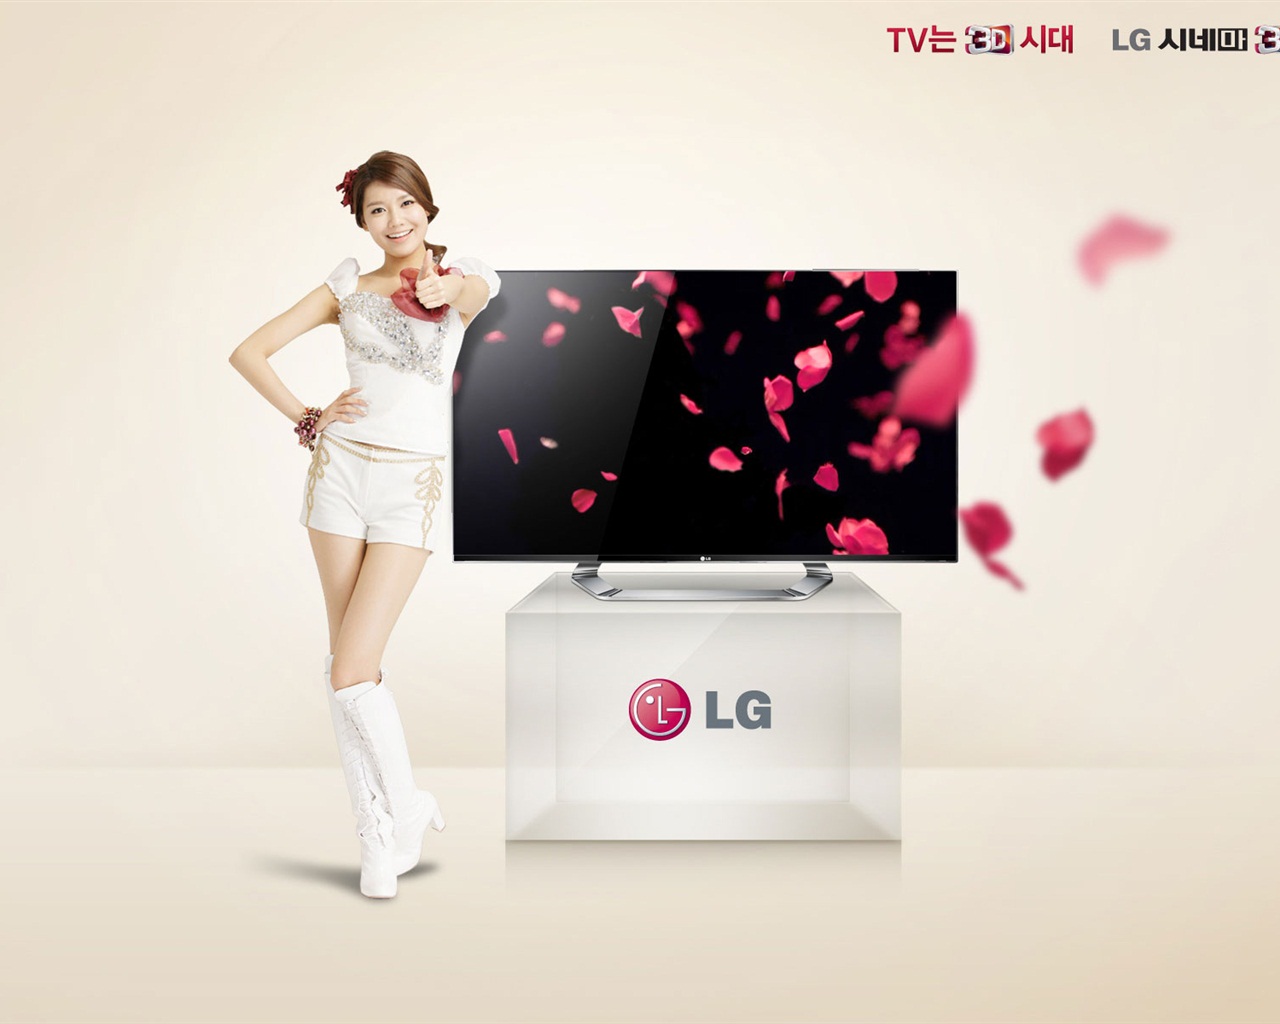 Girls Generation ACE and LG endorsements ads HD wallpapers #12 - 1280x1024